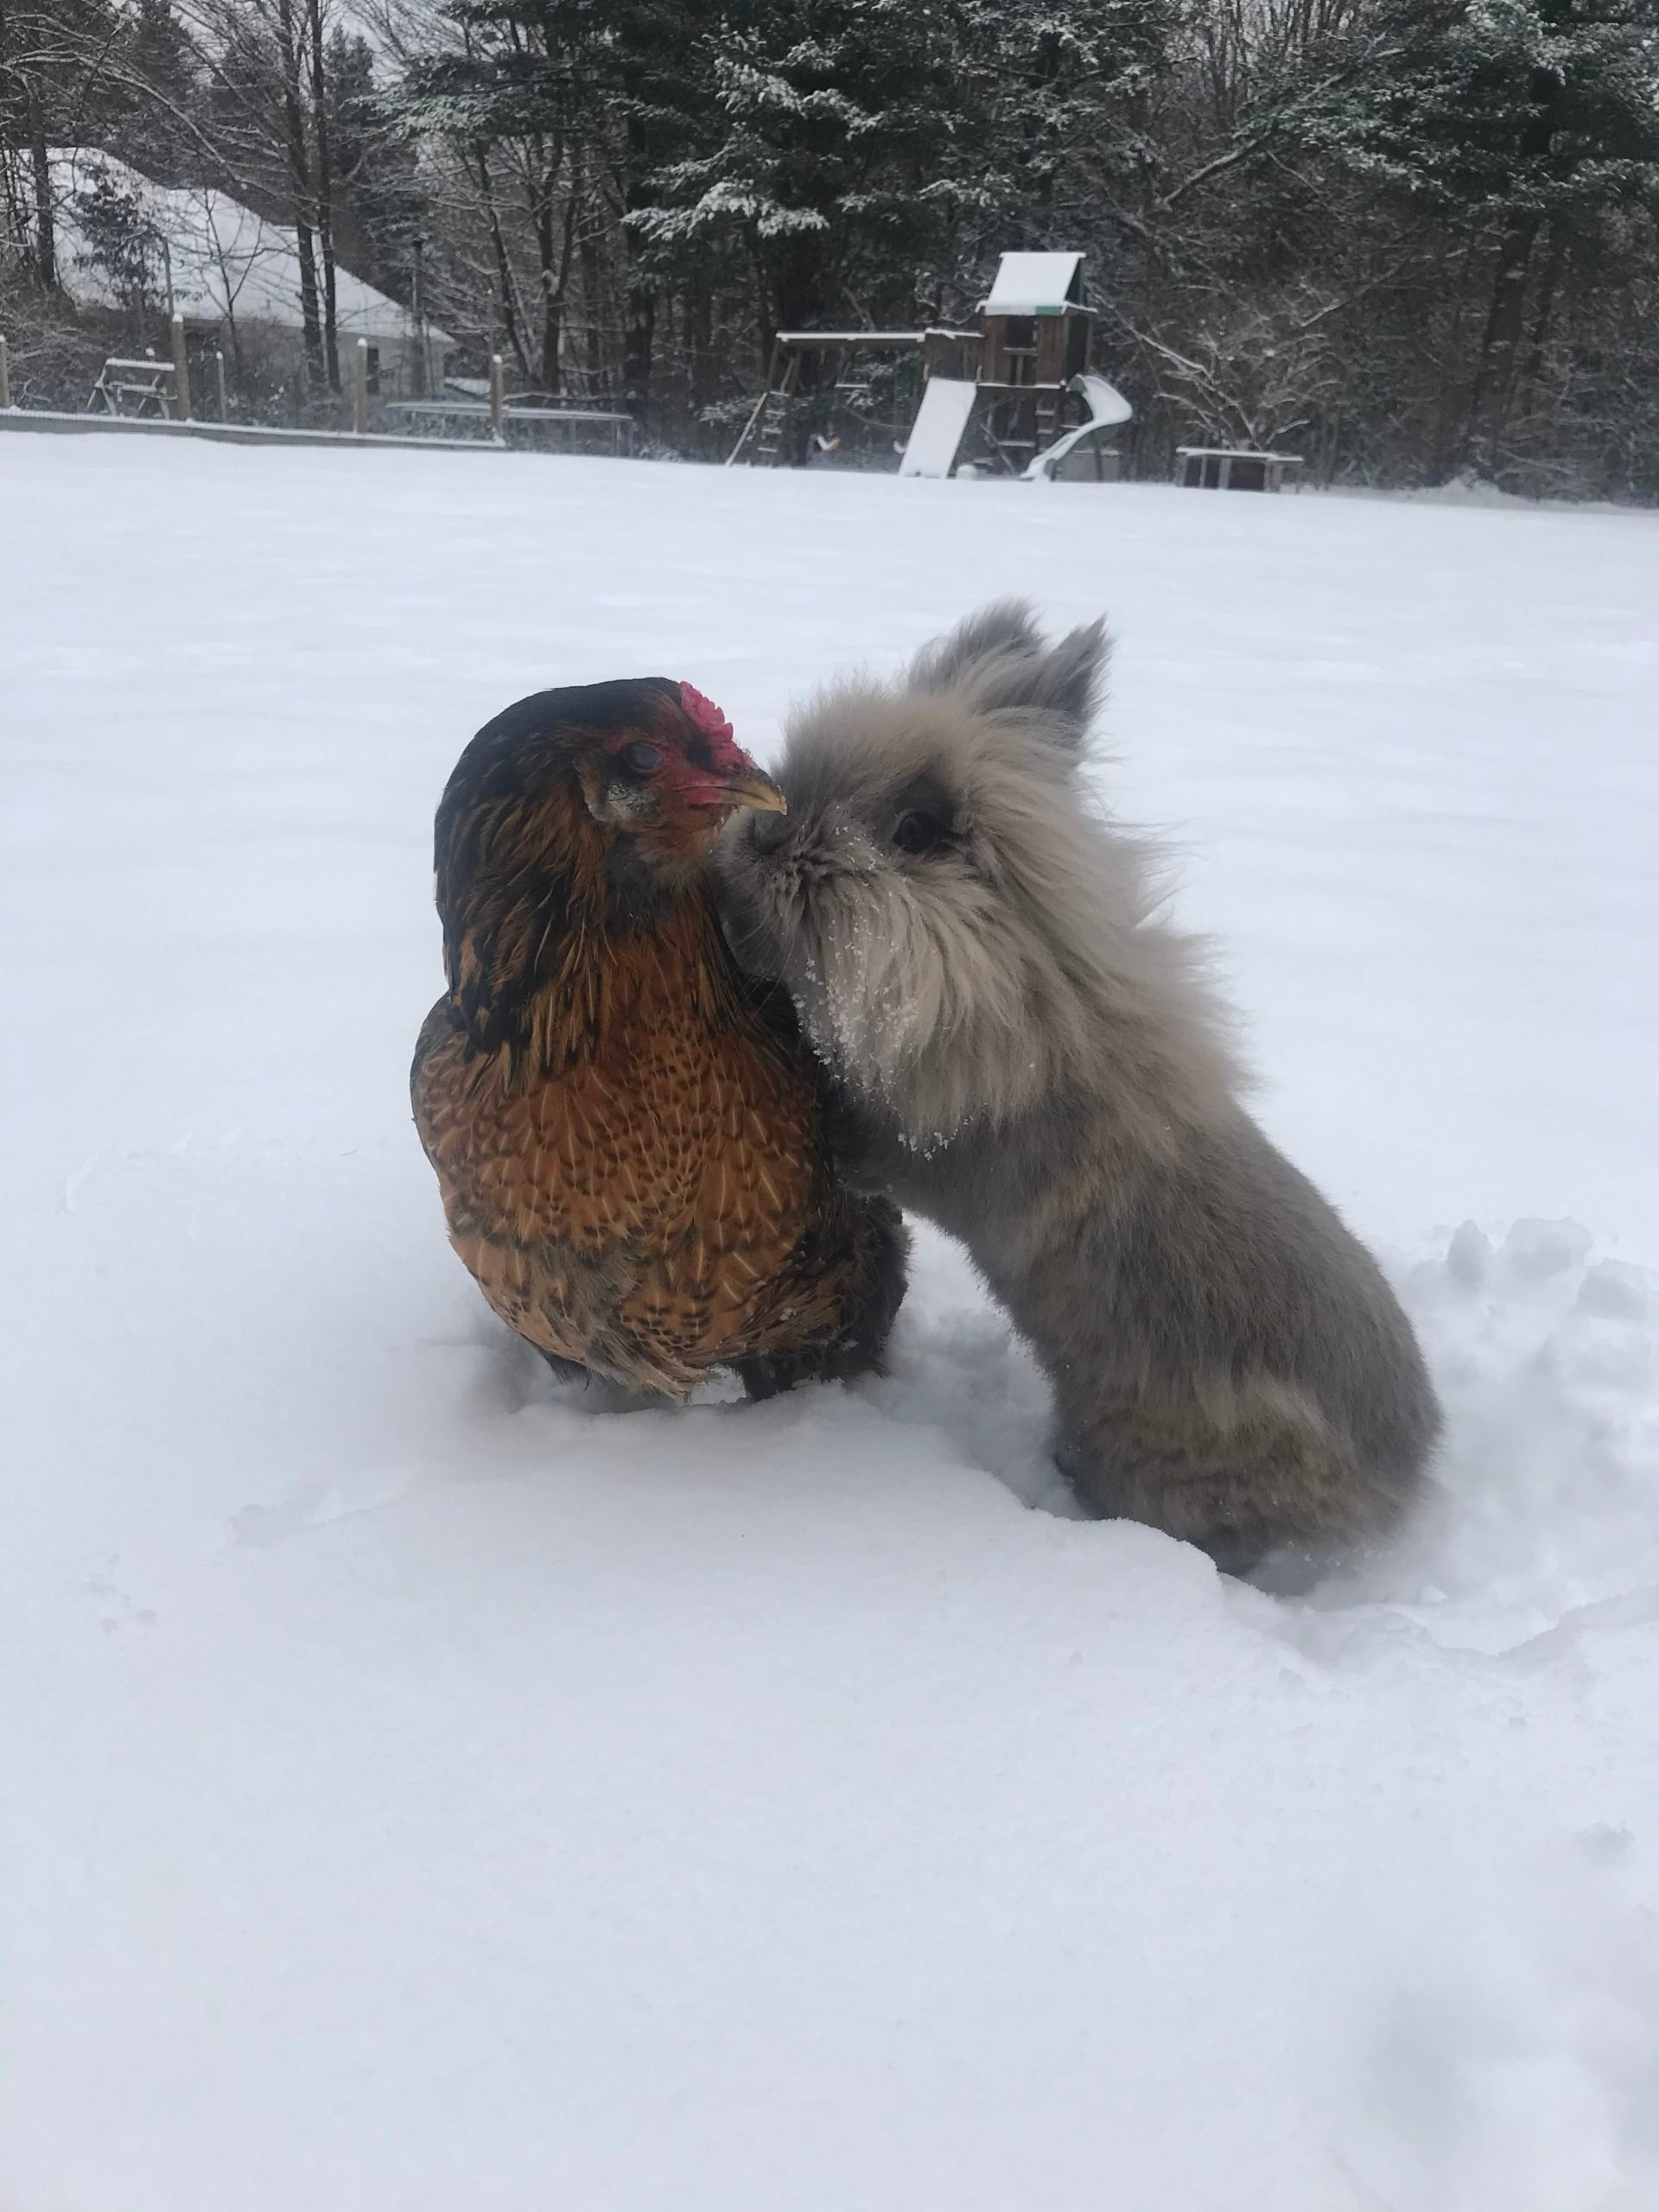 a chicken and a bunny play together in the snow